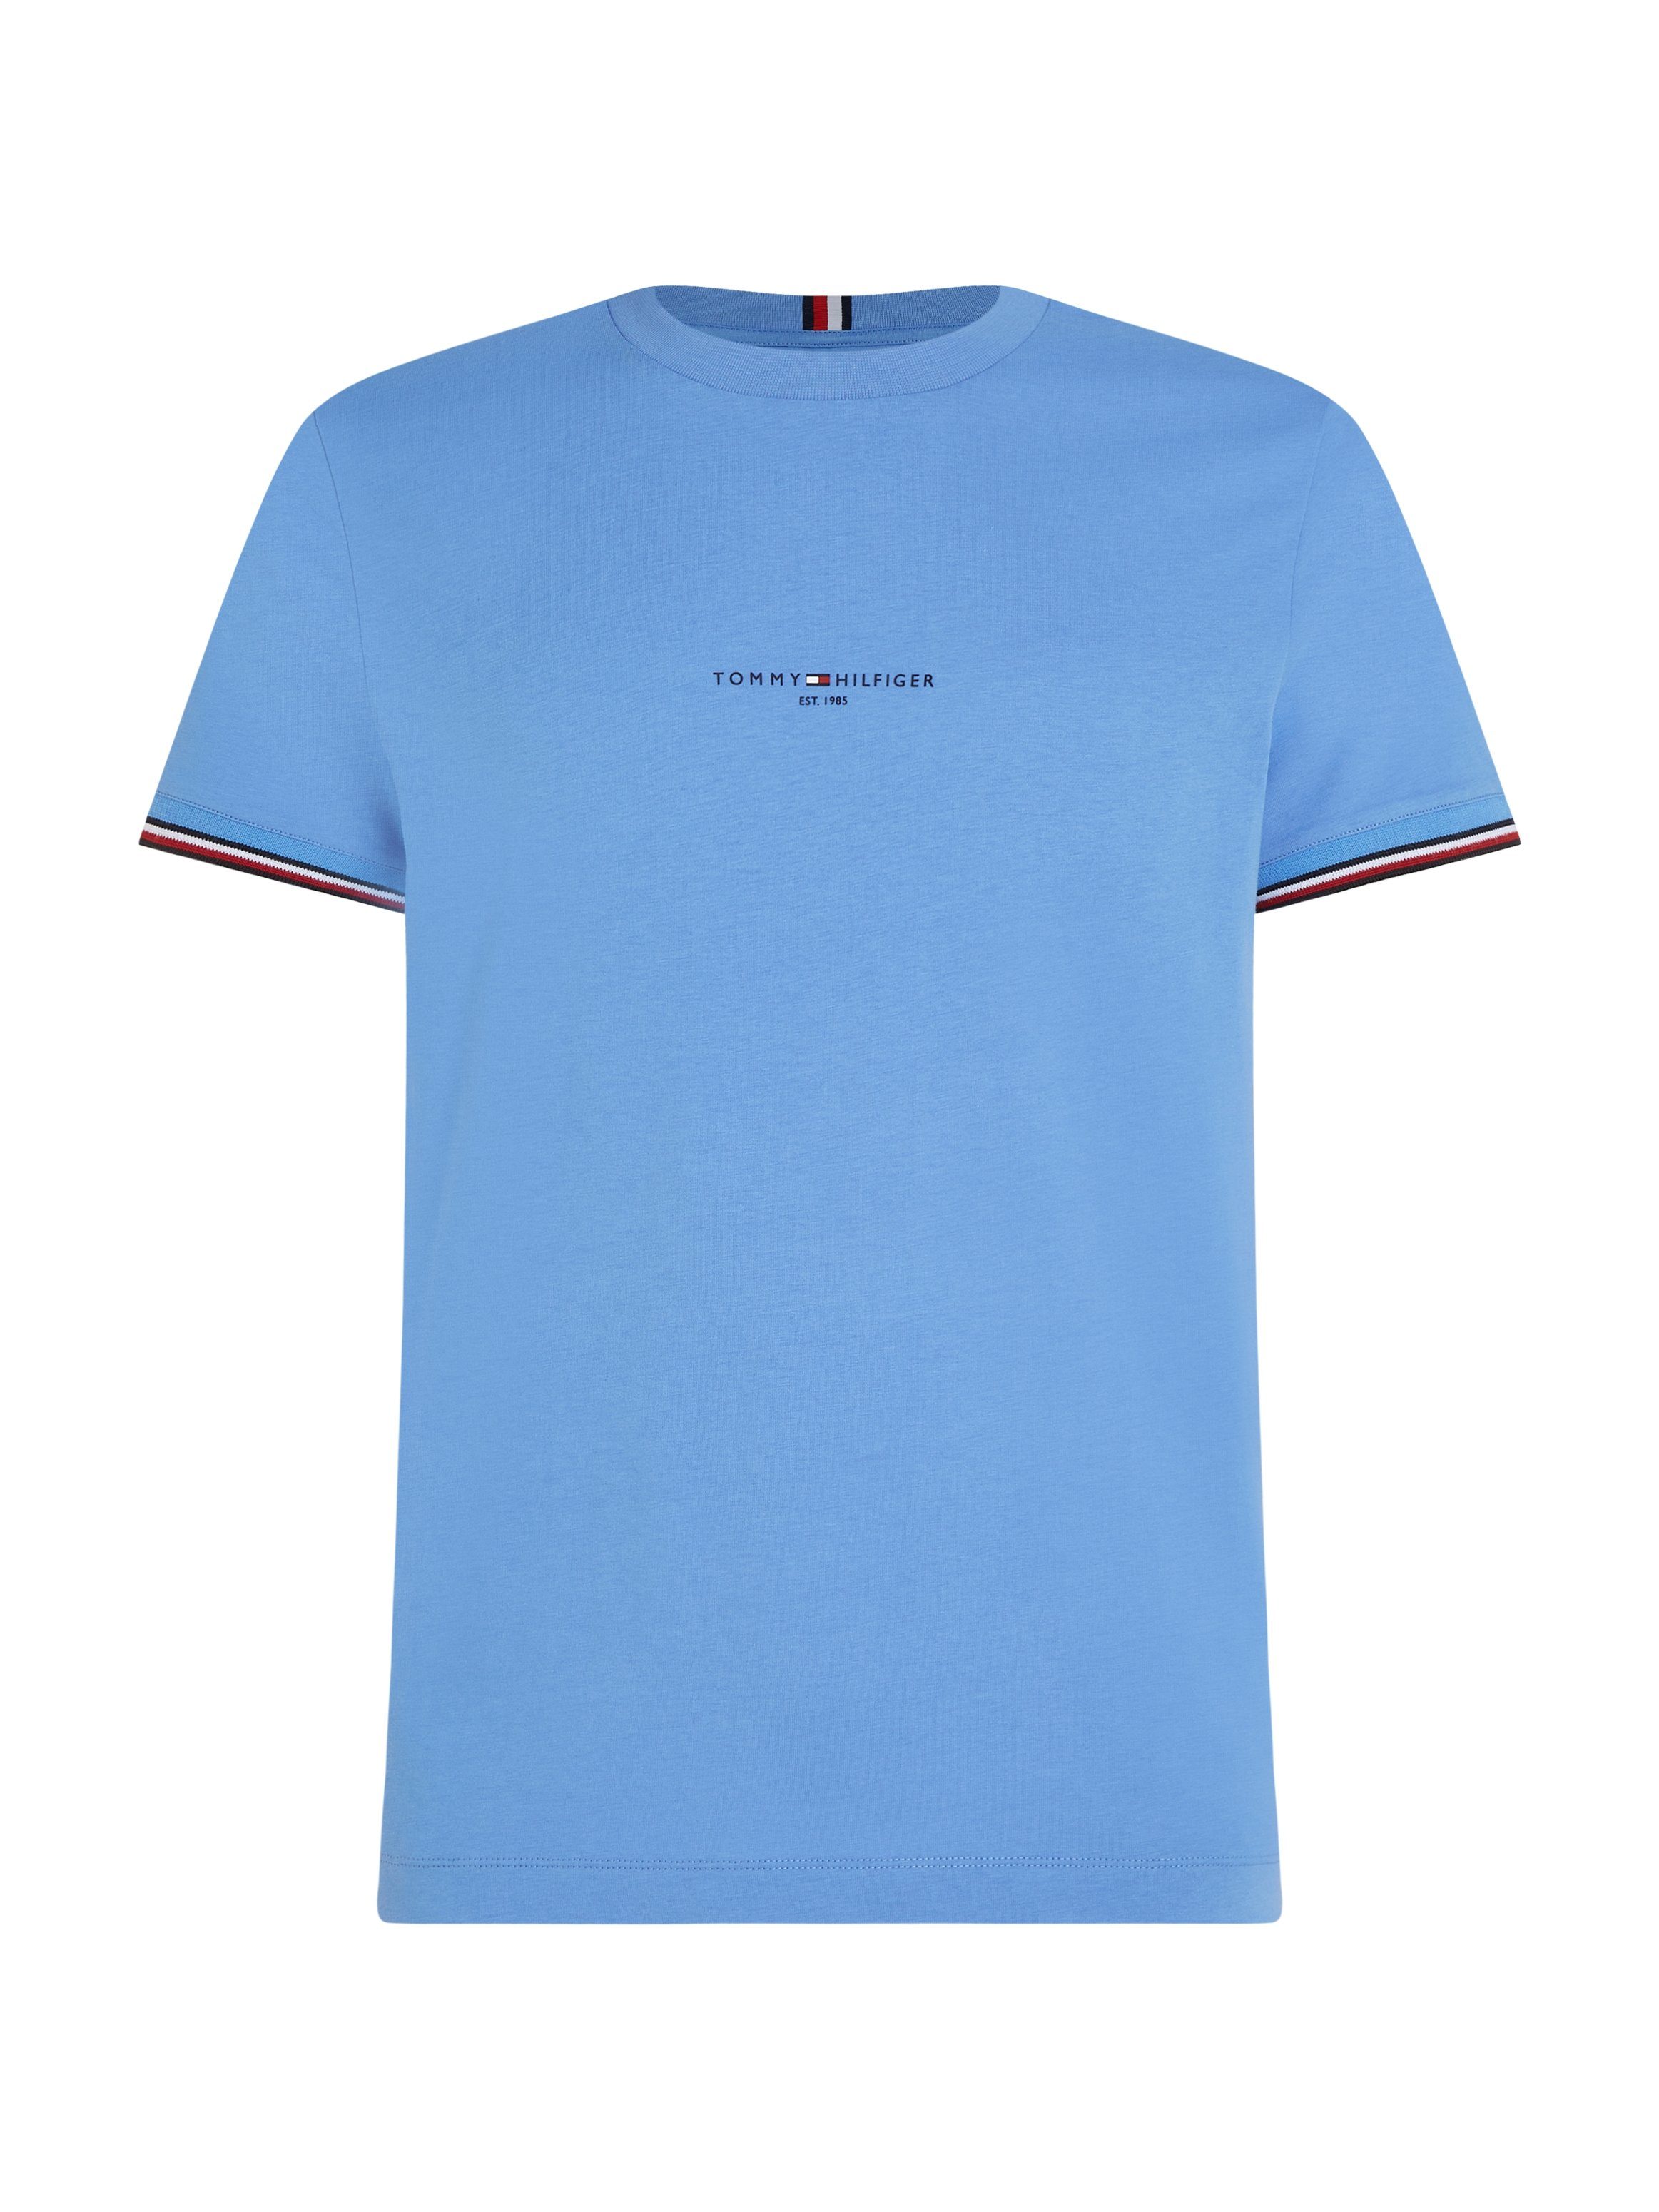 LOGO spell TIPPED Hilfiger TEE Tommy TOMMY blue T-Shirt